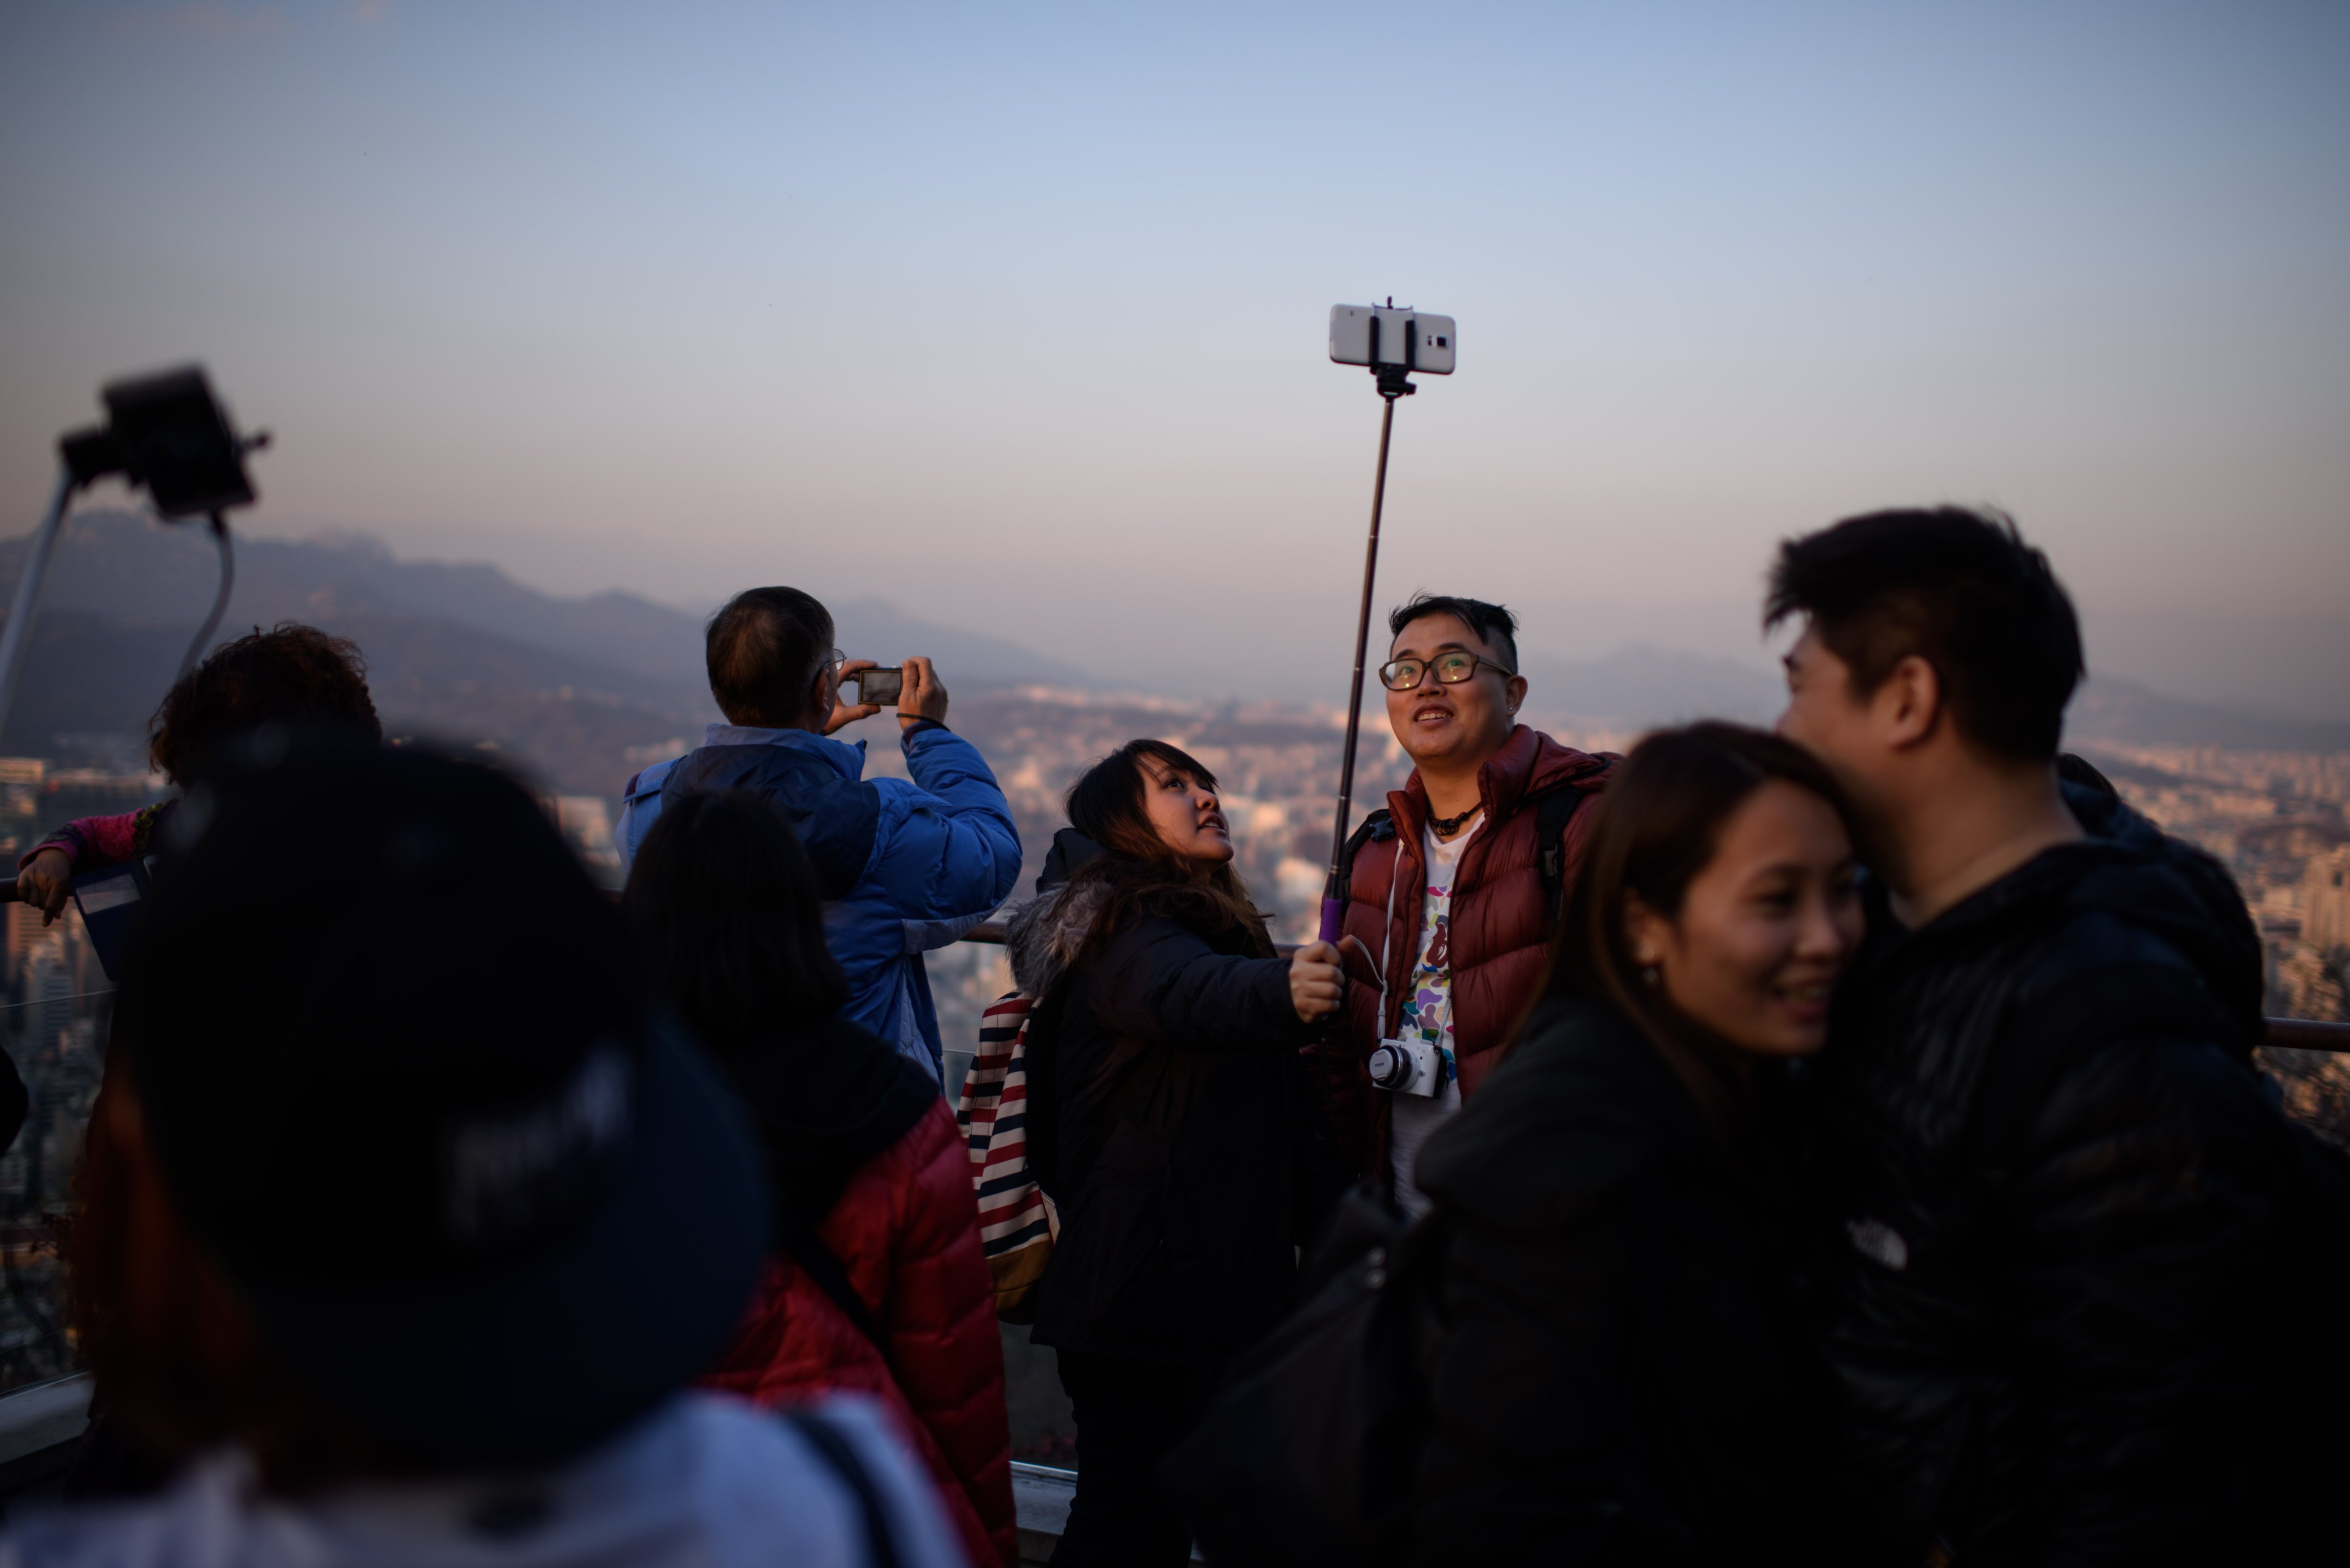 People use a 'selfie stick' to take a group photo overlooking the city skyline in Seoul, South Korea, on Nov. 26, 2014 (Ed Jones—AFP/Getty Images)